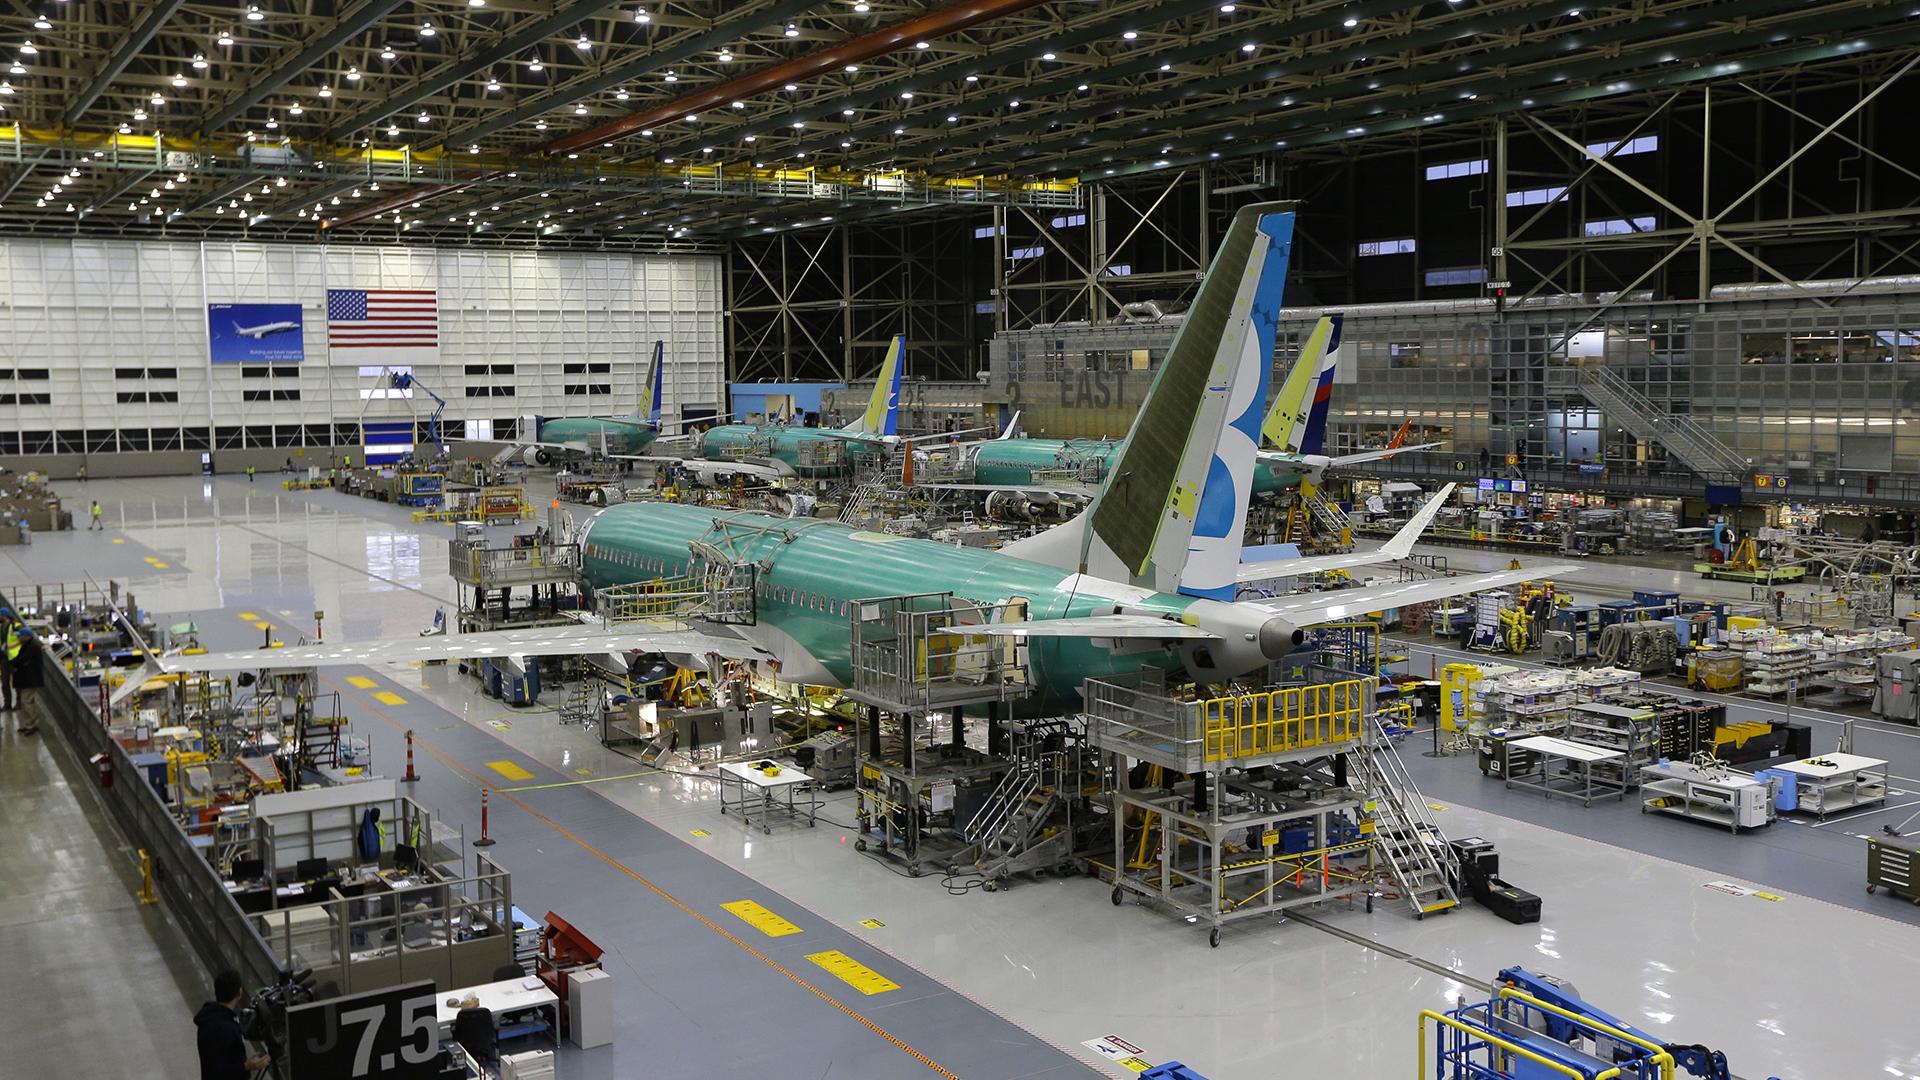 This Dec. 7, 2015, file photo shows the second Boeing 737 MAX airplane being built on the assembly line in Renton, Washington. (AP Photo / Ted S. Warren, File)